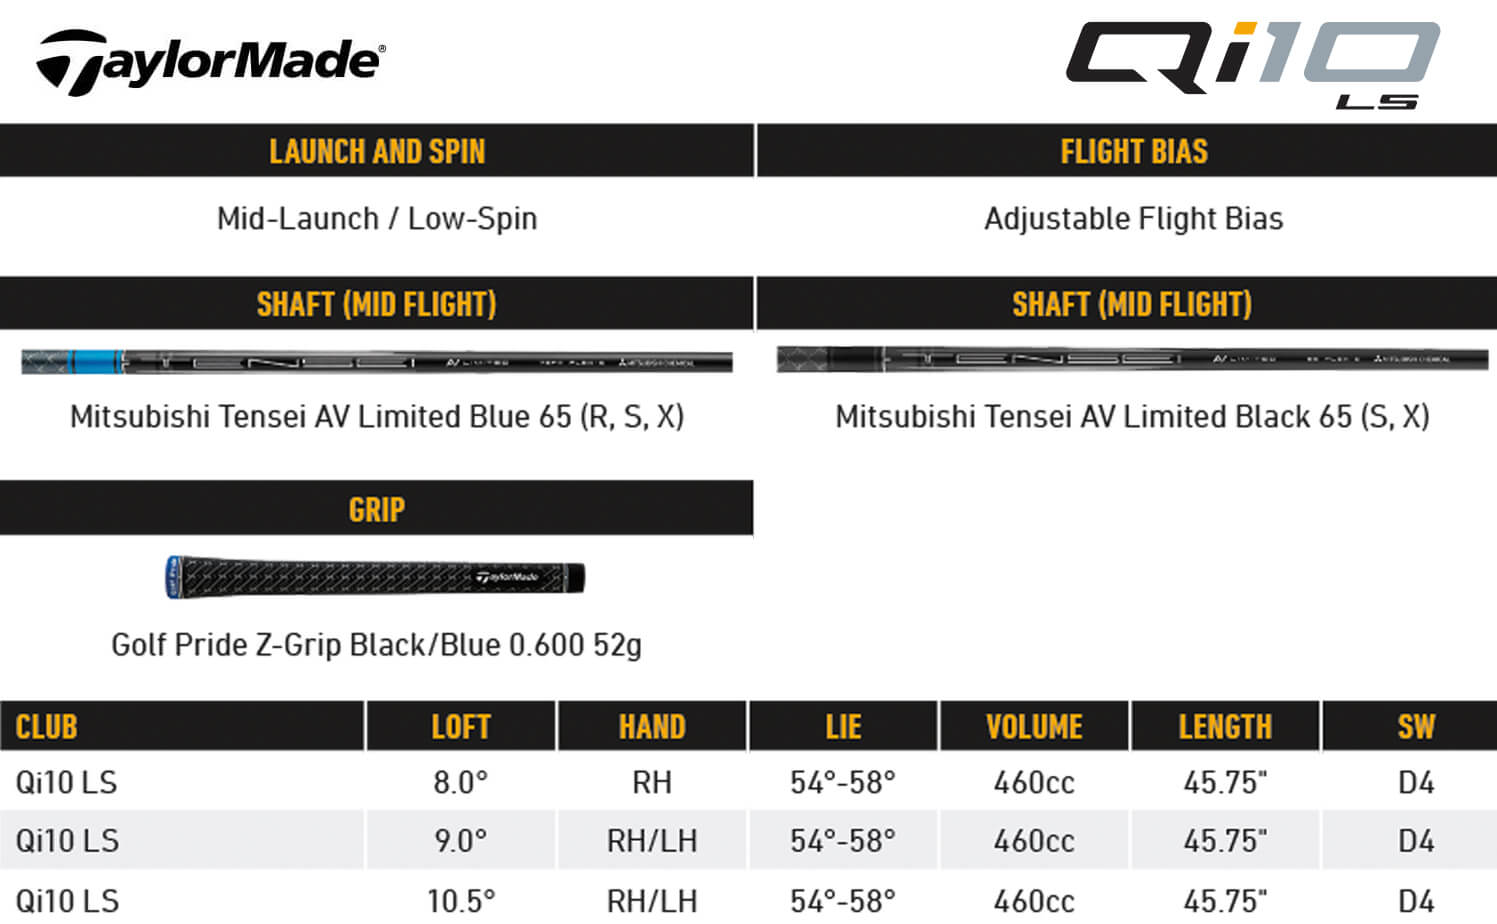 TaylorMade Qi10 LS Driver Specifications